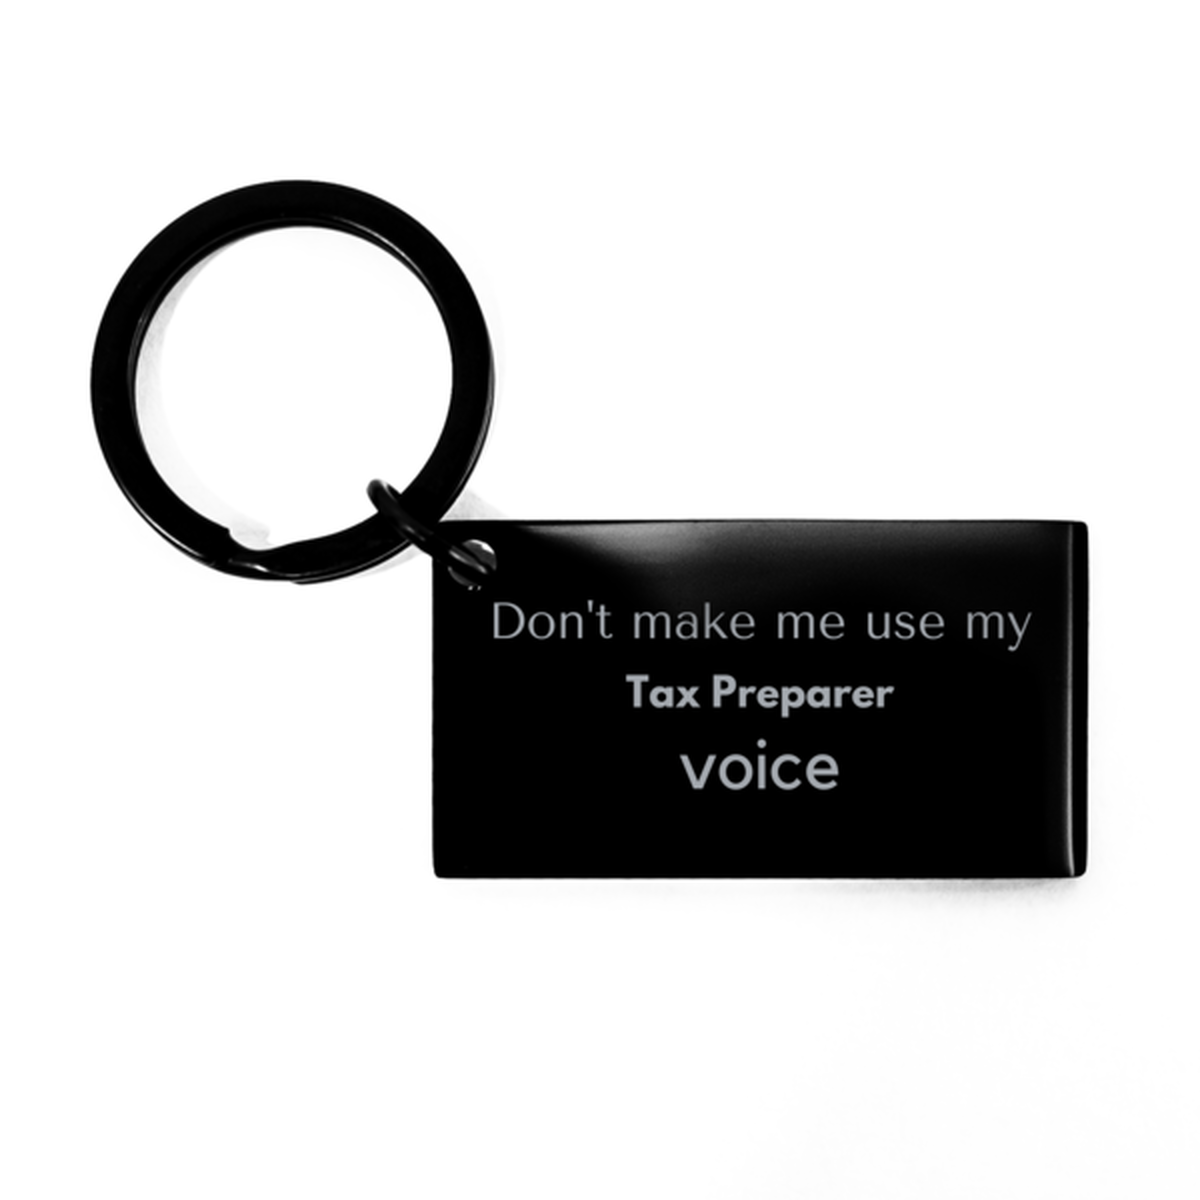 Don't make me use my Tax Preparer voice, Sarcasm Tax Preparer Gifts, Christmas Tax Preparer Keychain Birthday Unique Gifts For Tax Preparer Coworkers, Men, Women, Colleague, Friends